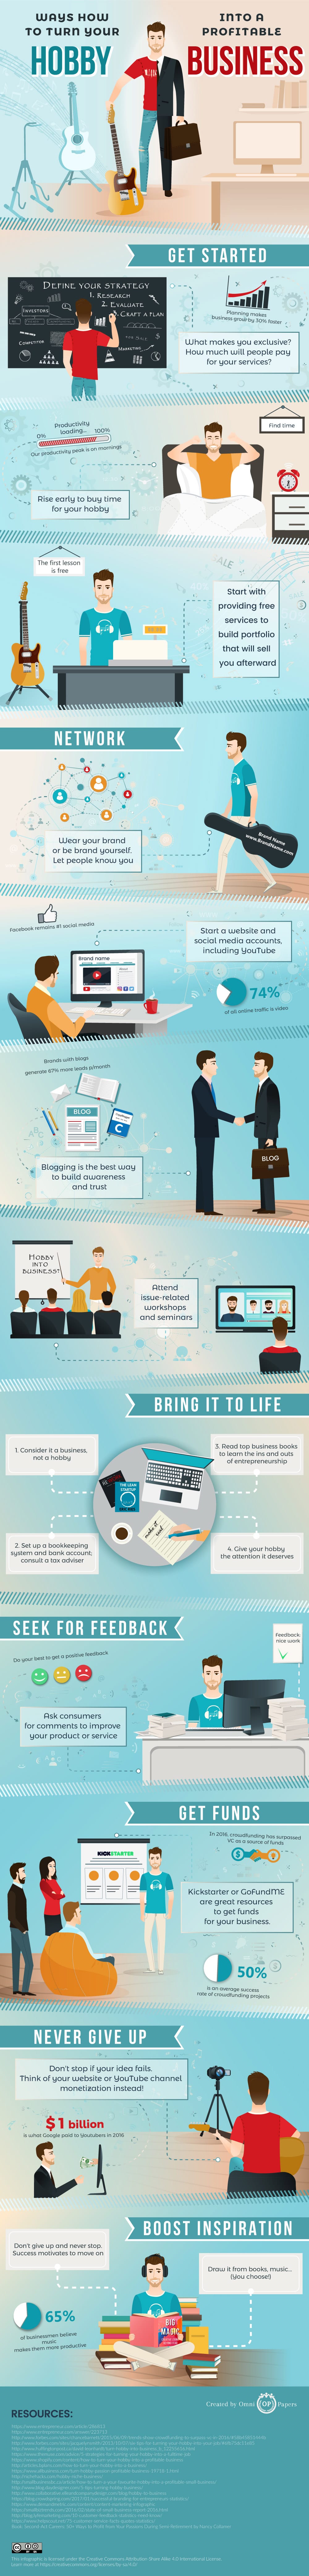 How To Make Money With Your Hobby [Infographic]